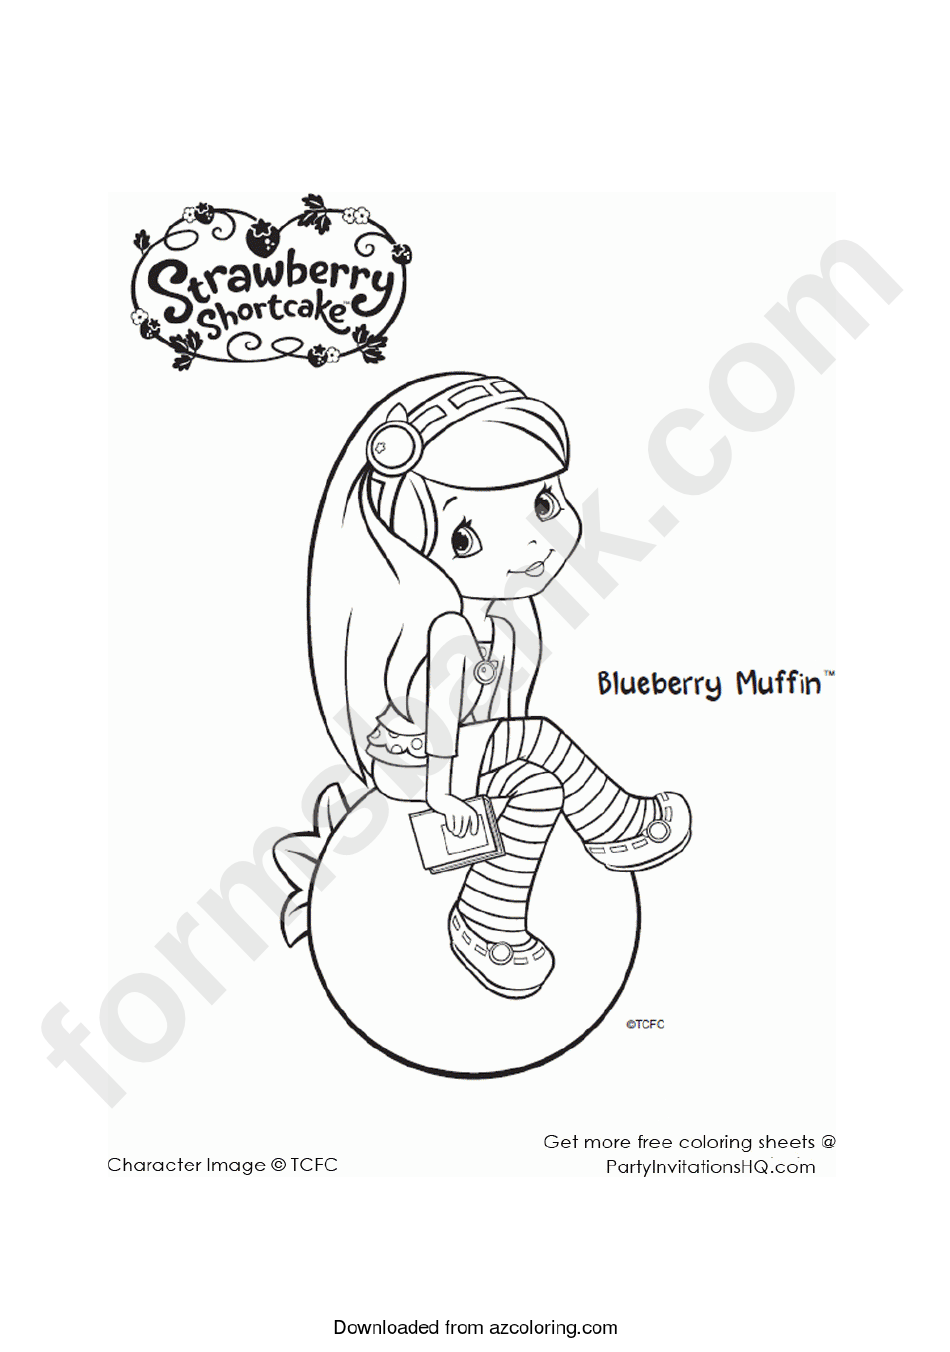 Strawberry Shortcake Coloring Page - Blueberry Muffin